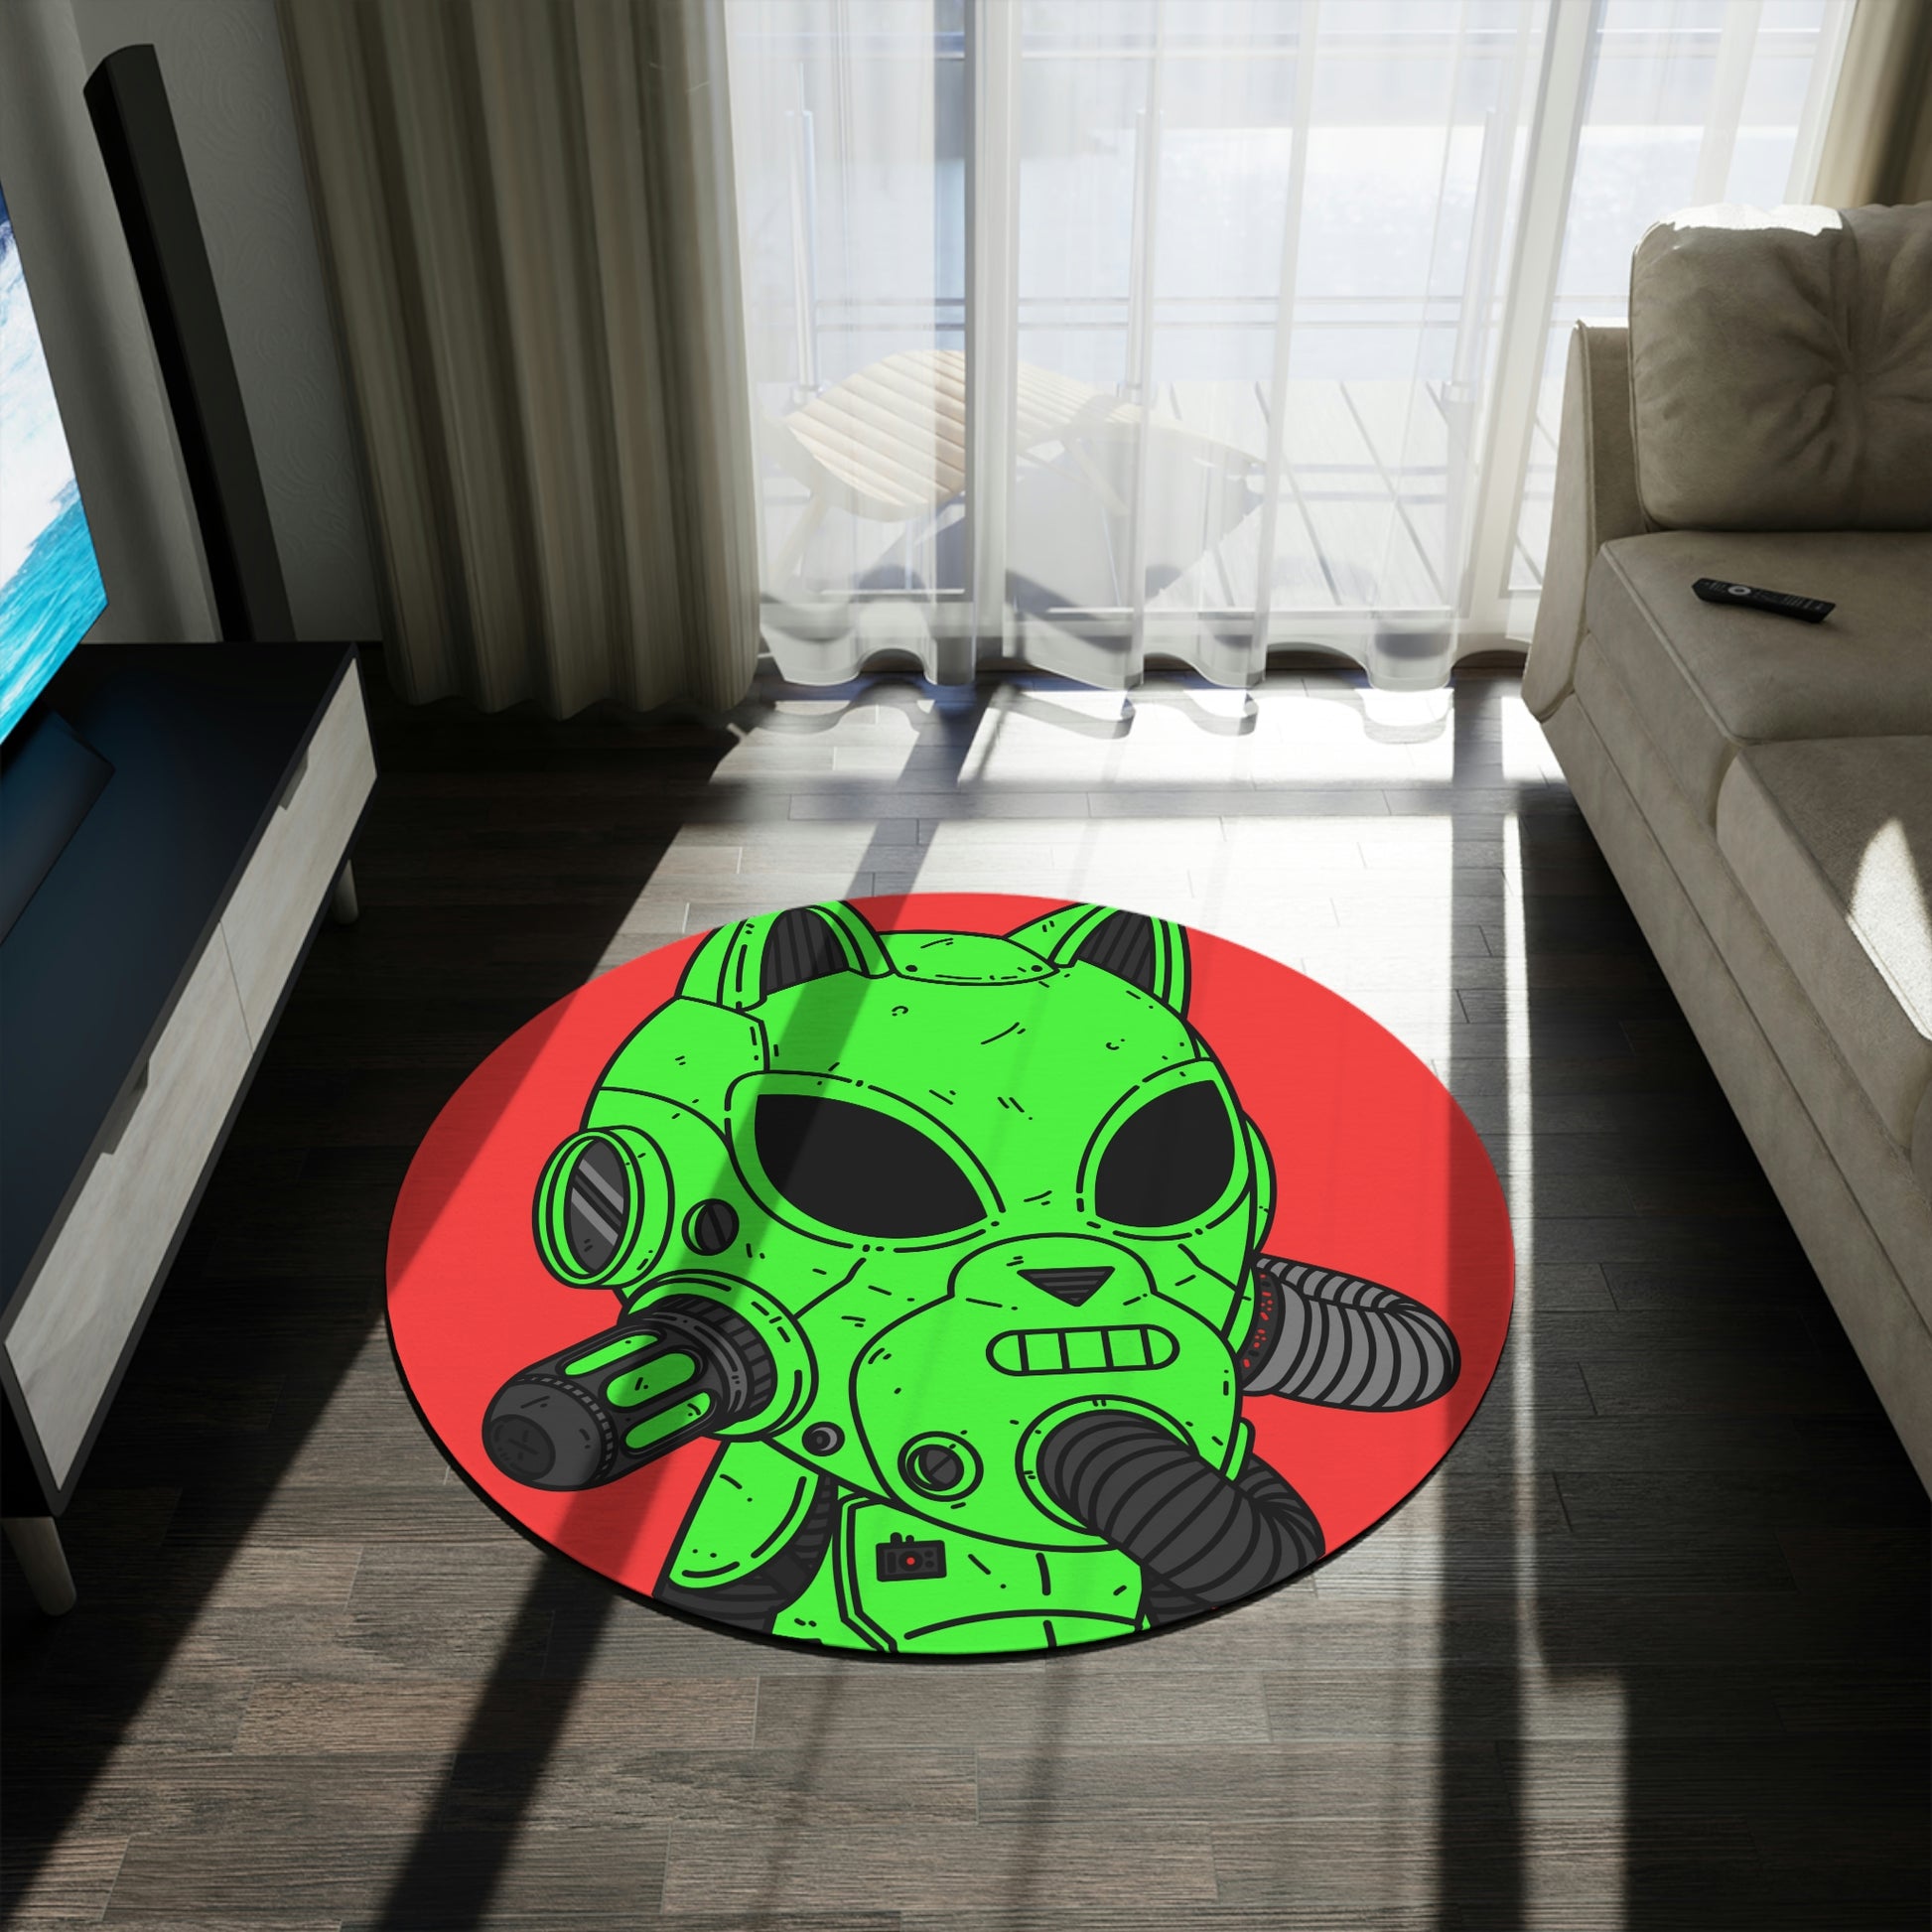 Cat Ears Armored Green Future Alien Cyborg Machine Visitor Round Rug - Visitor751